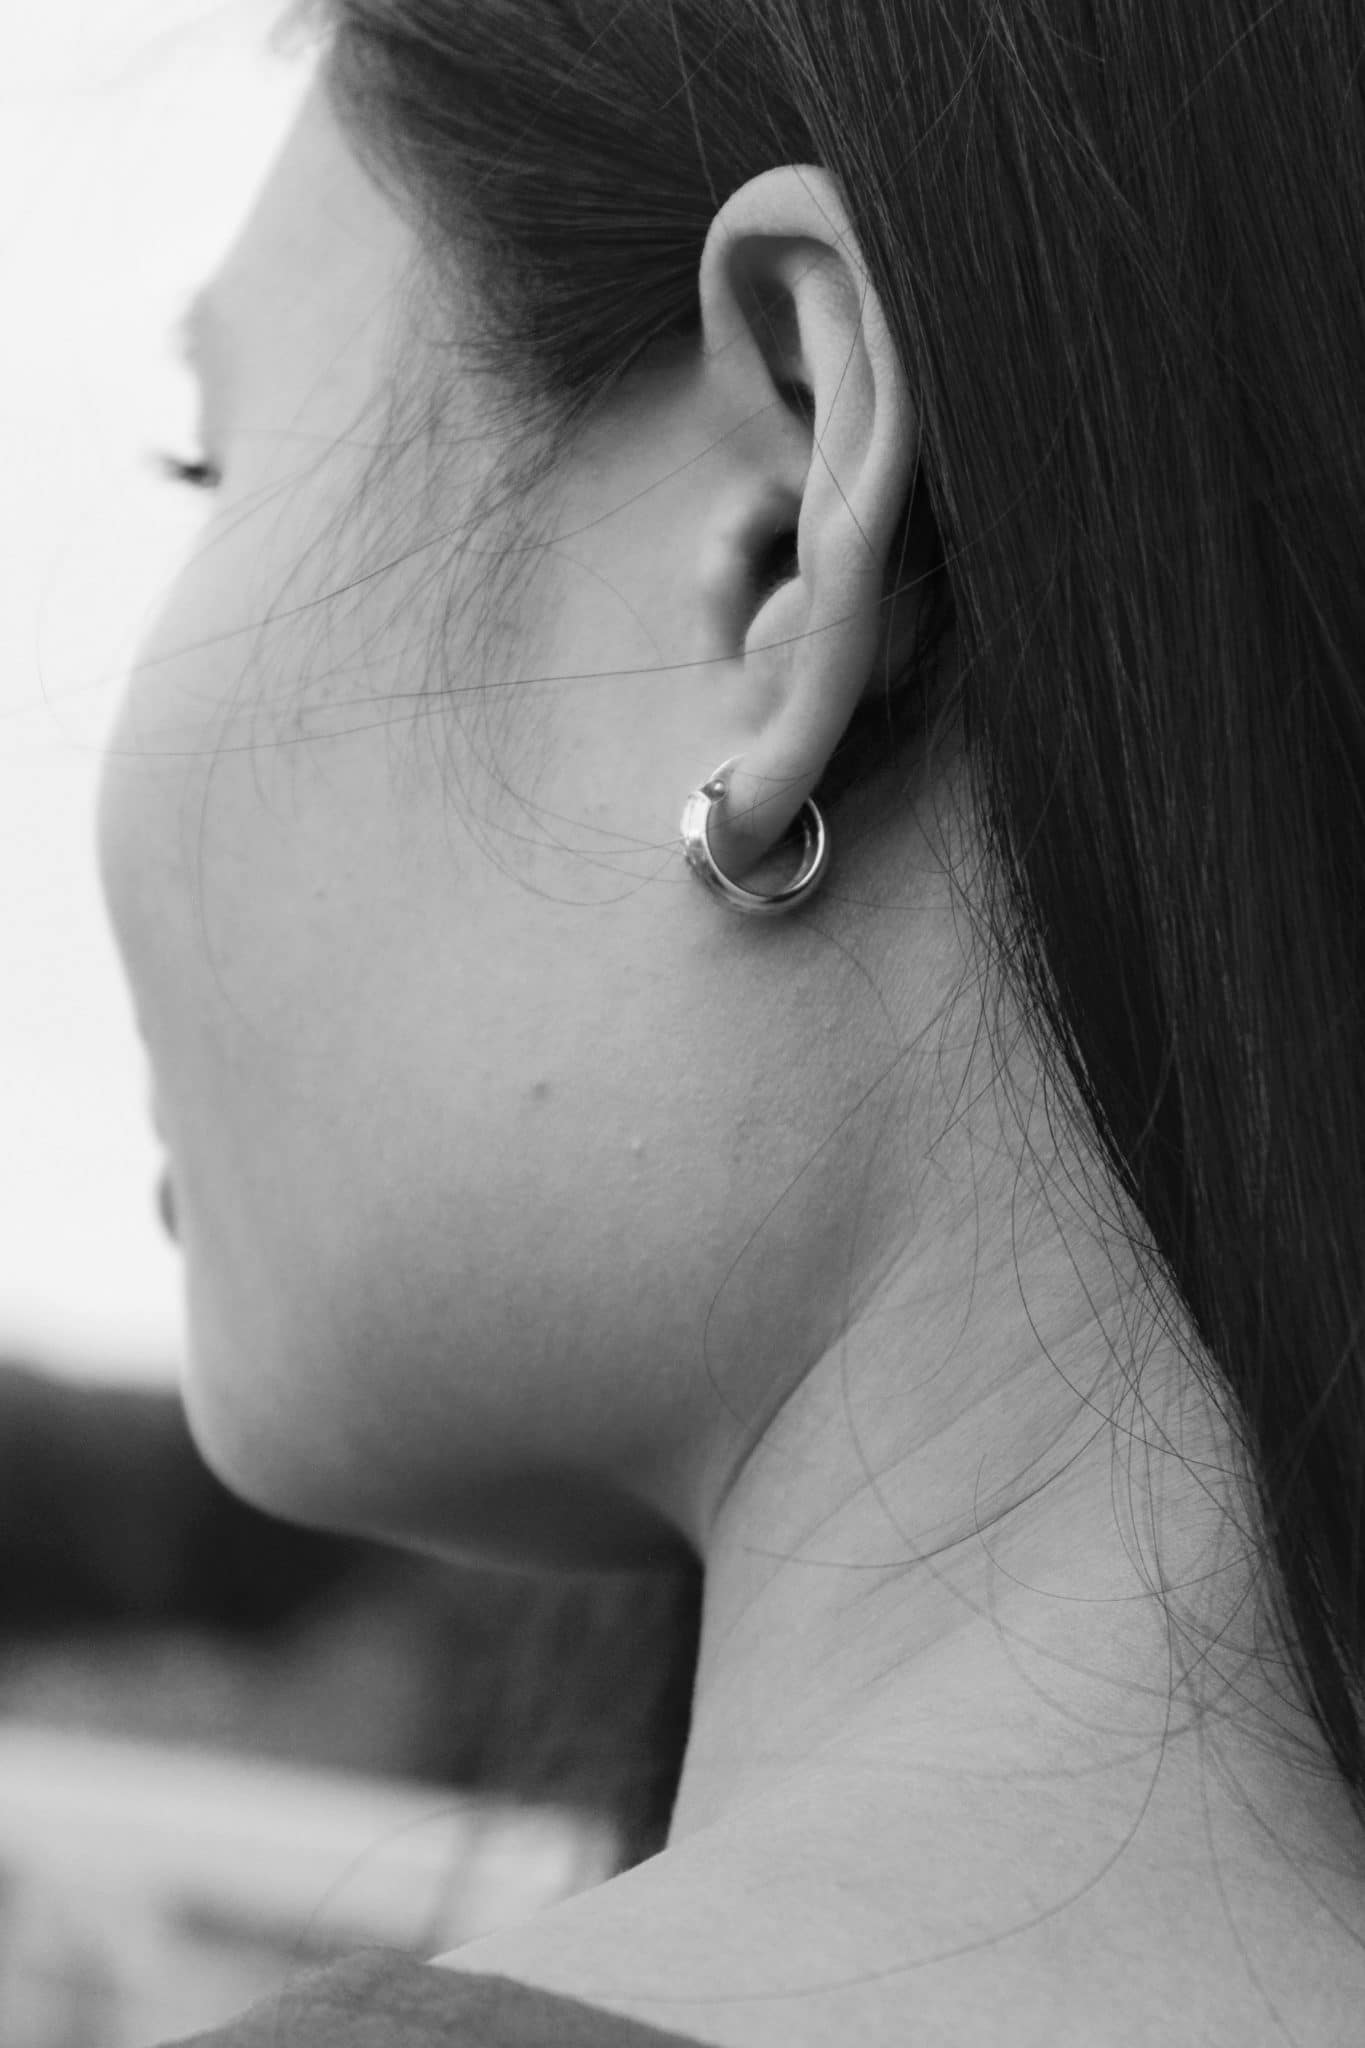 Embedded Earrings Removal in SG - Aurion ENT & Hearing Centre